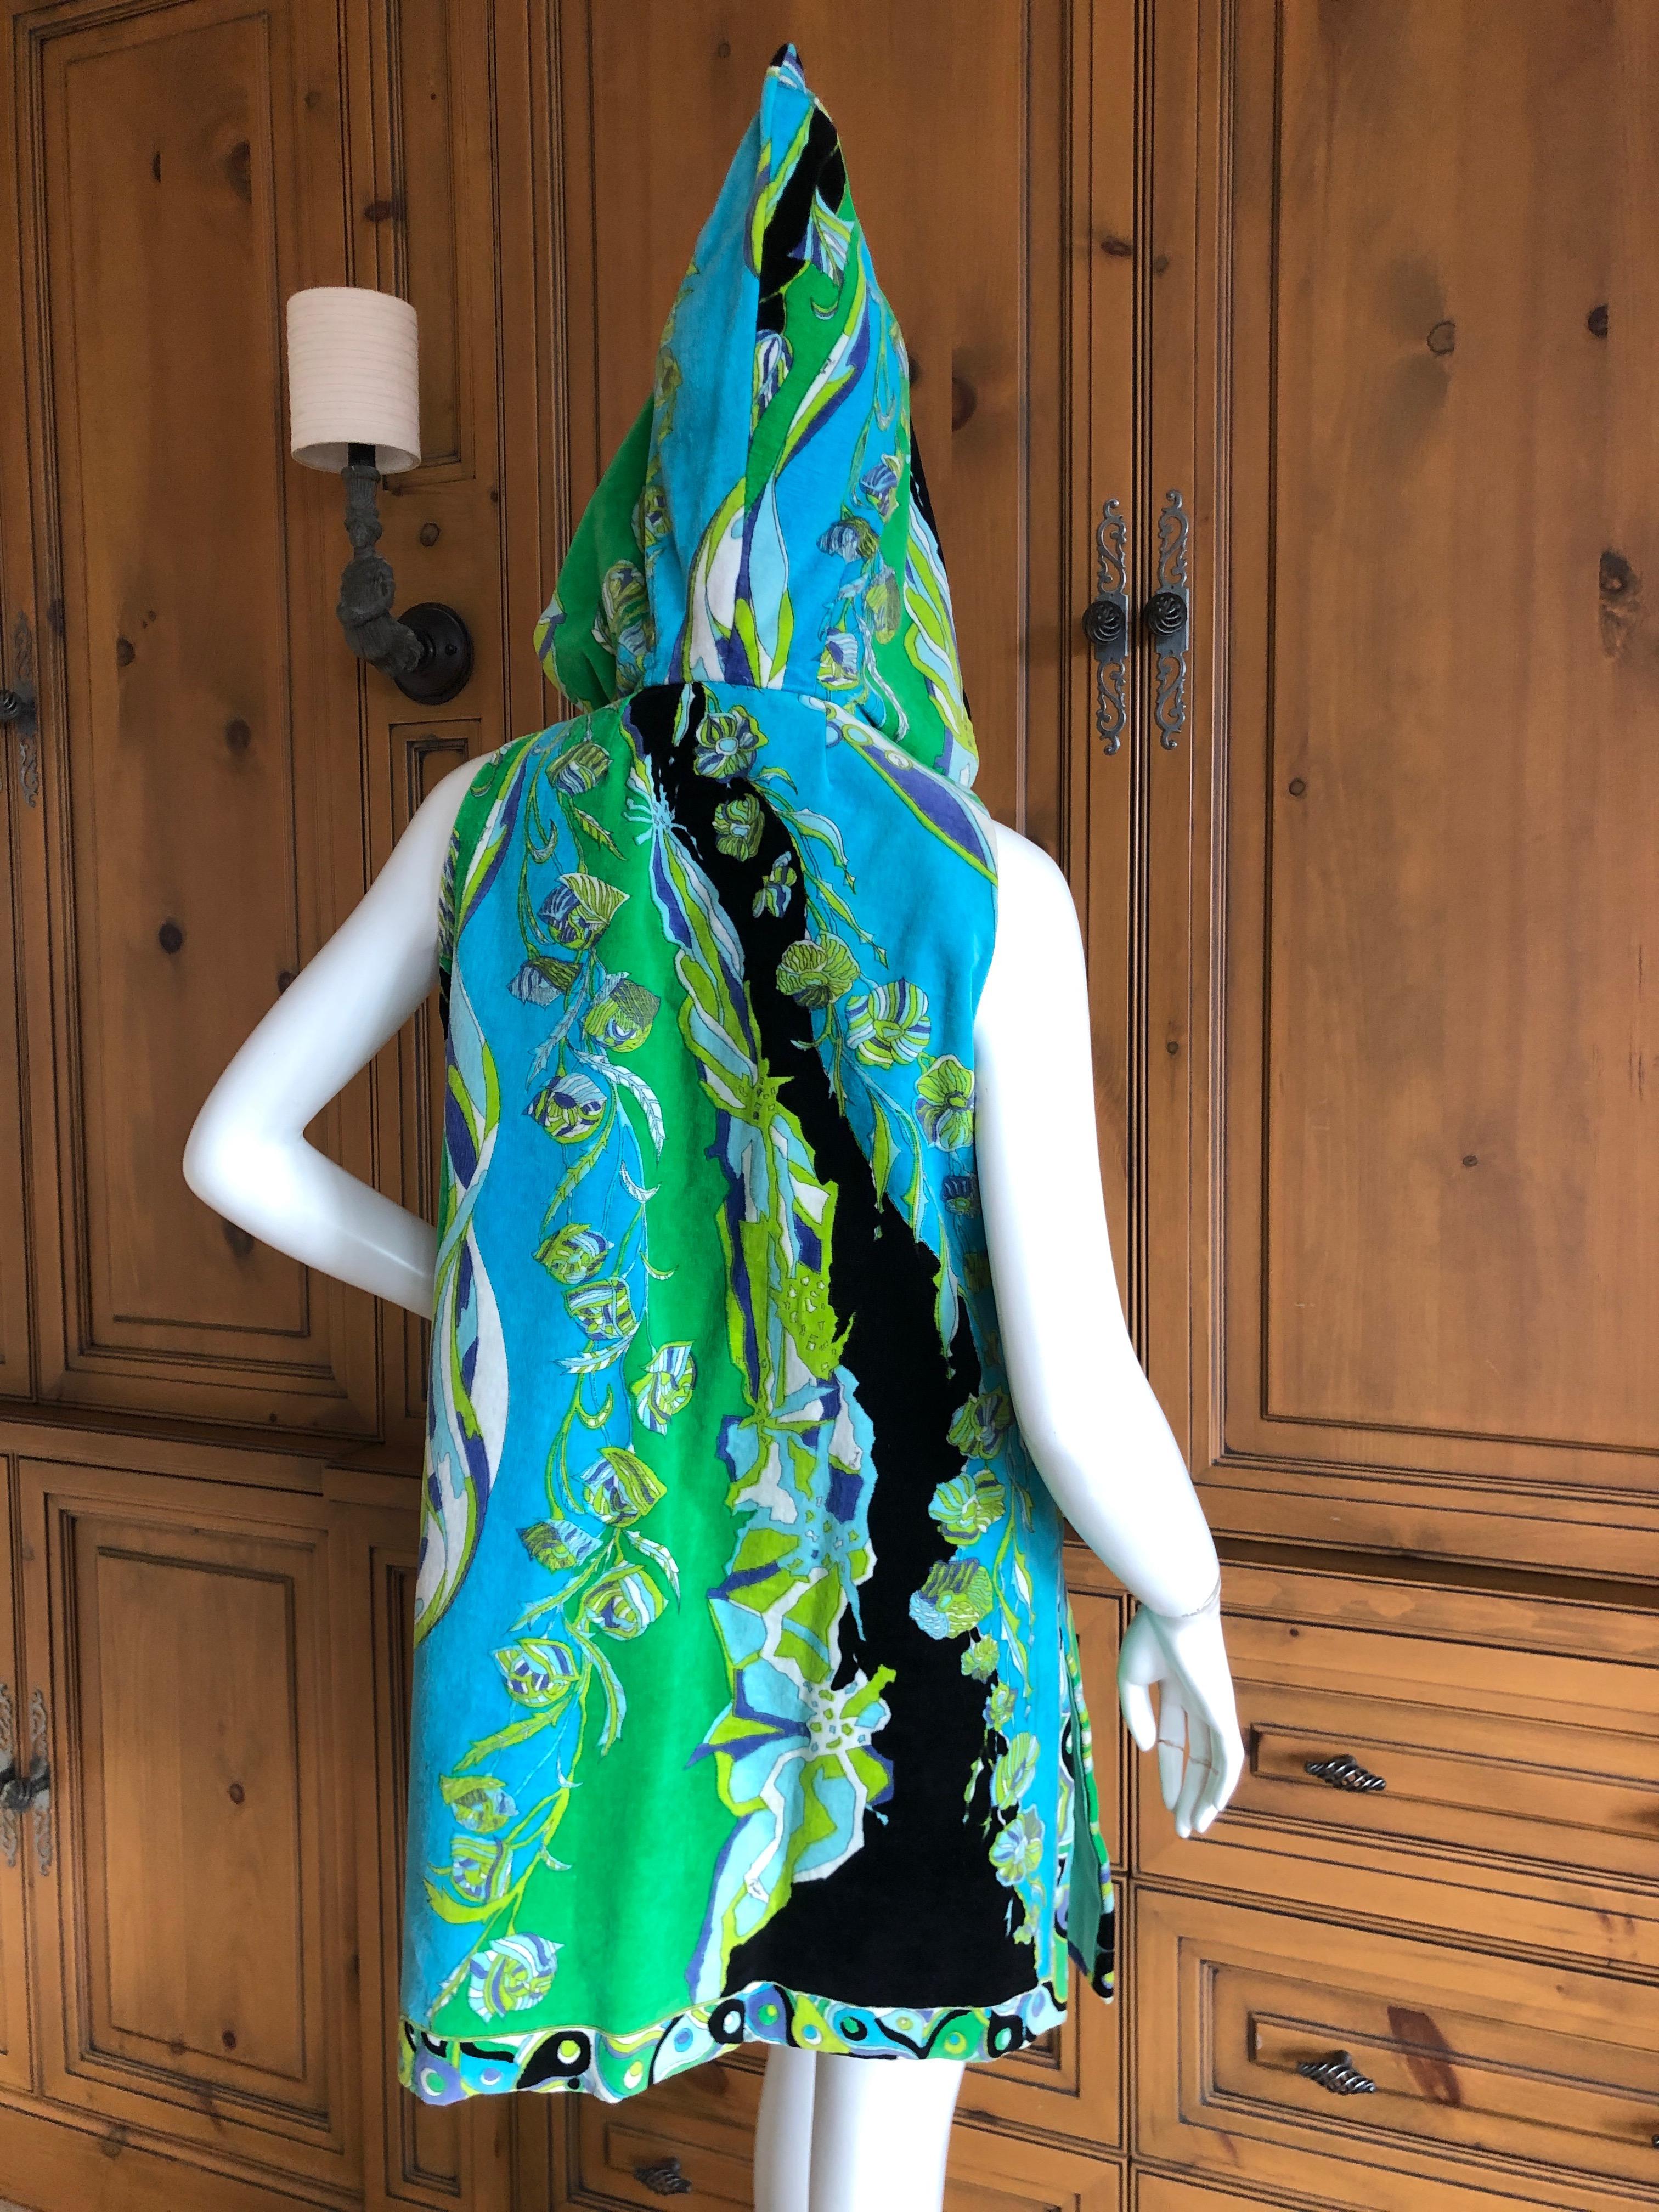 Emilio Pucci Vintage 1960's Terry Cloth Velvet Beach Wrap Dress w Hood & Bow Tie In Excellent Condition For Sale In Cloverdale, CA